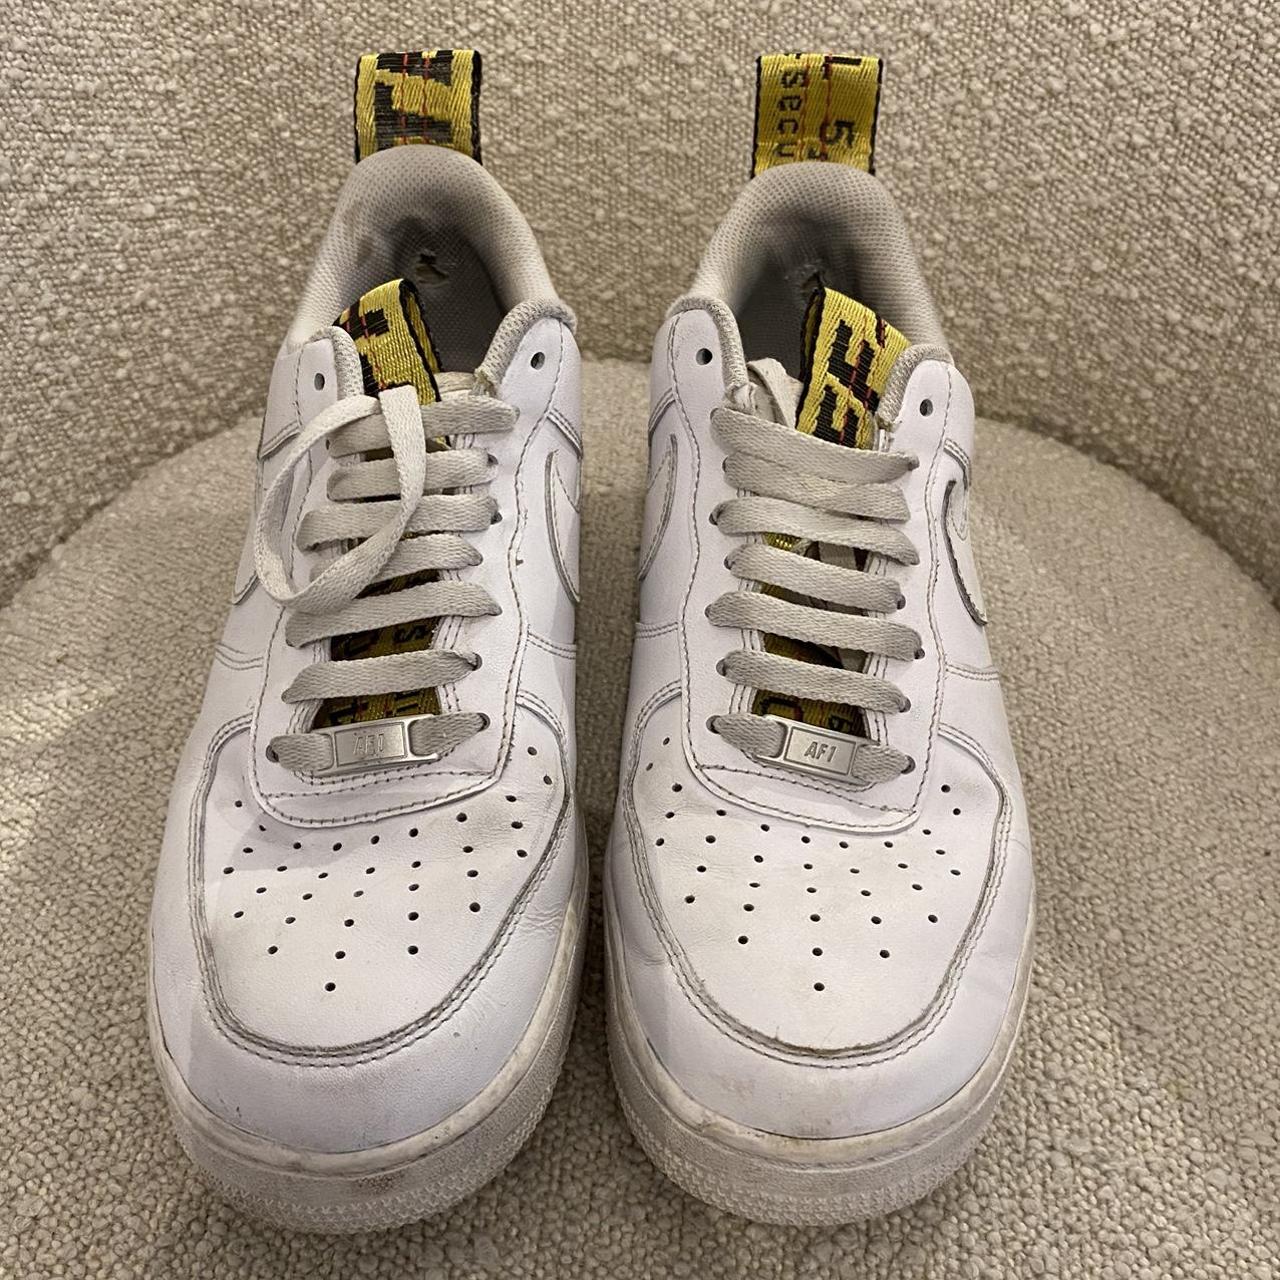 Off-White Women's Yellow and White Trainers